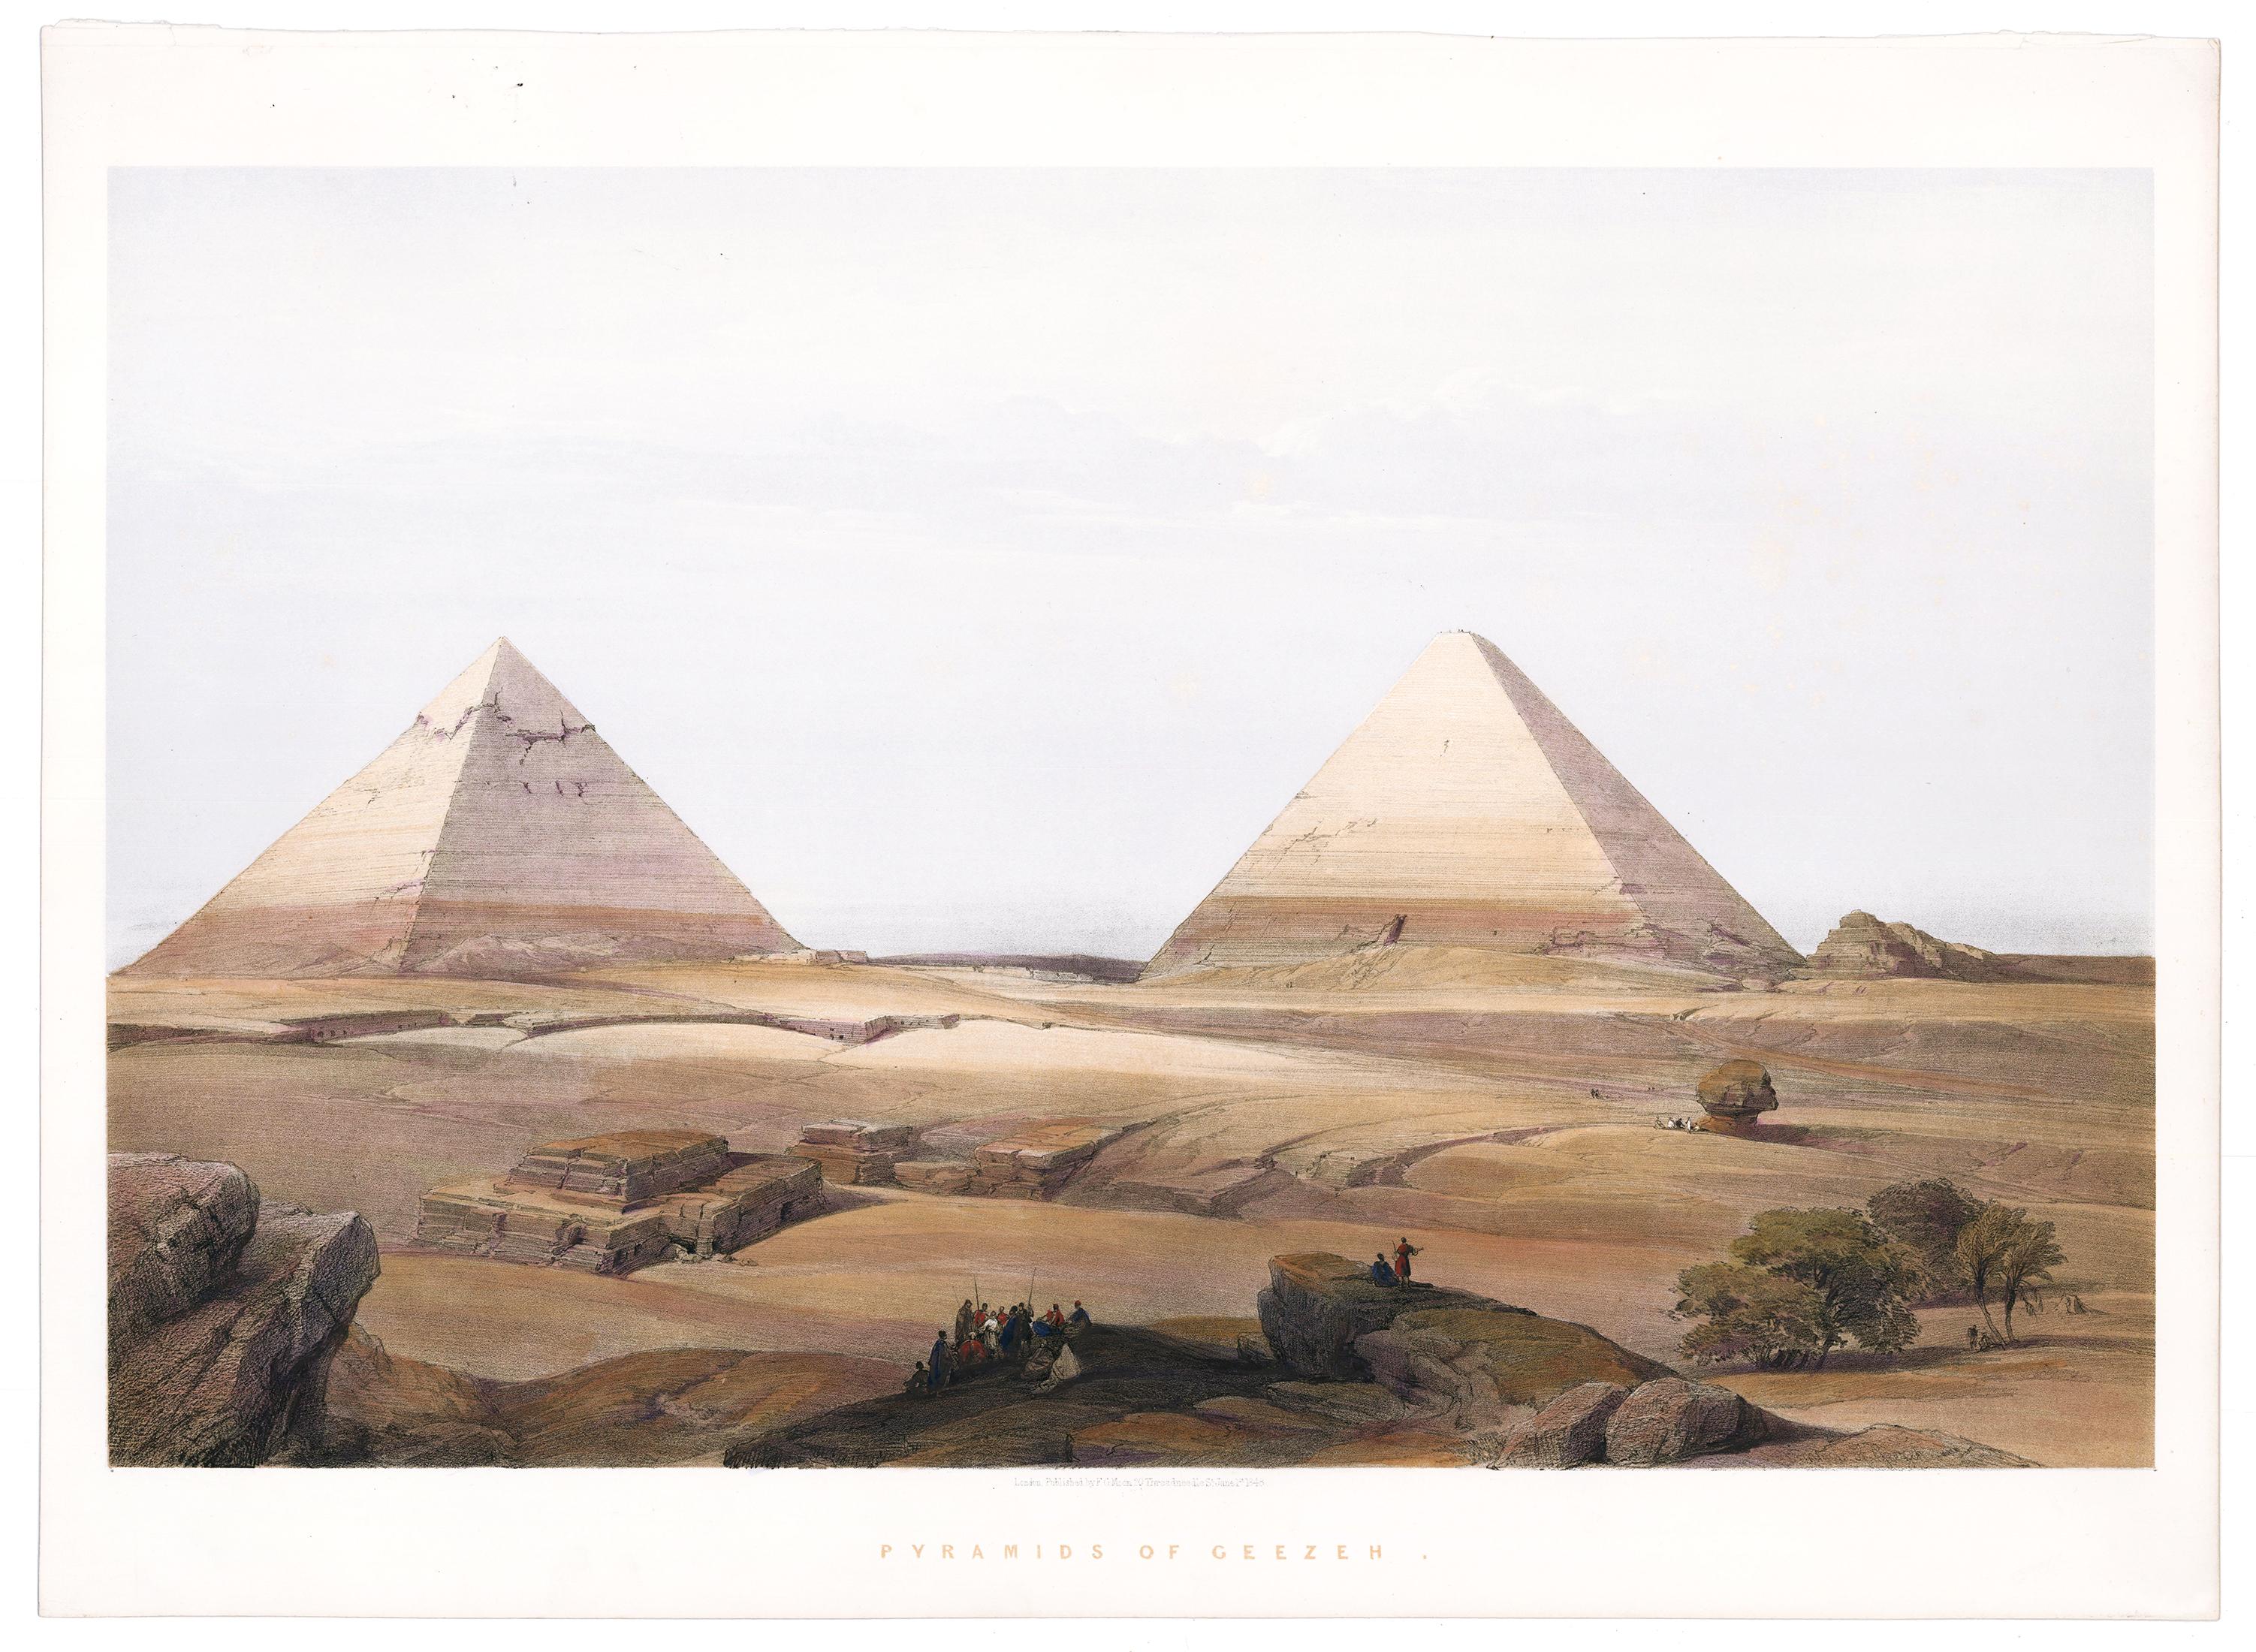 Hand-Colored Lithograph of the Pyramids at Gizeh. - Print by David Roberts